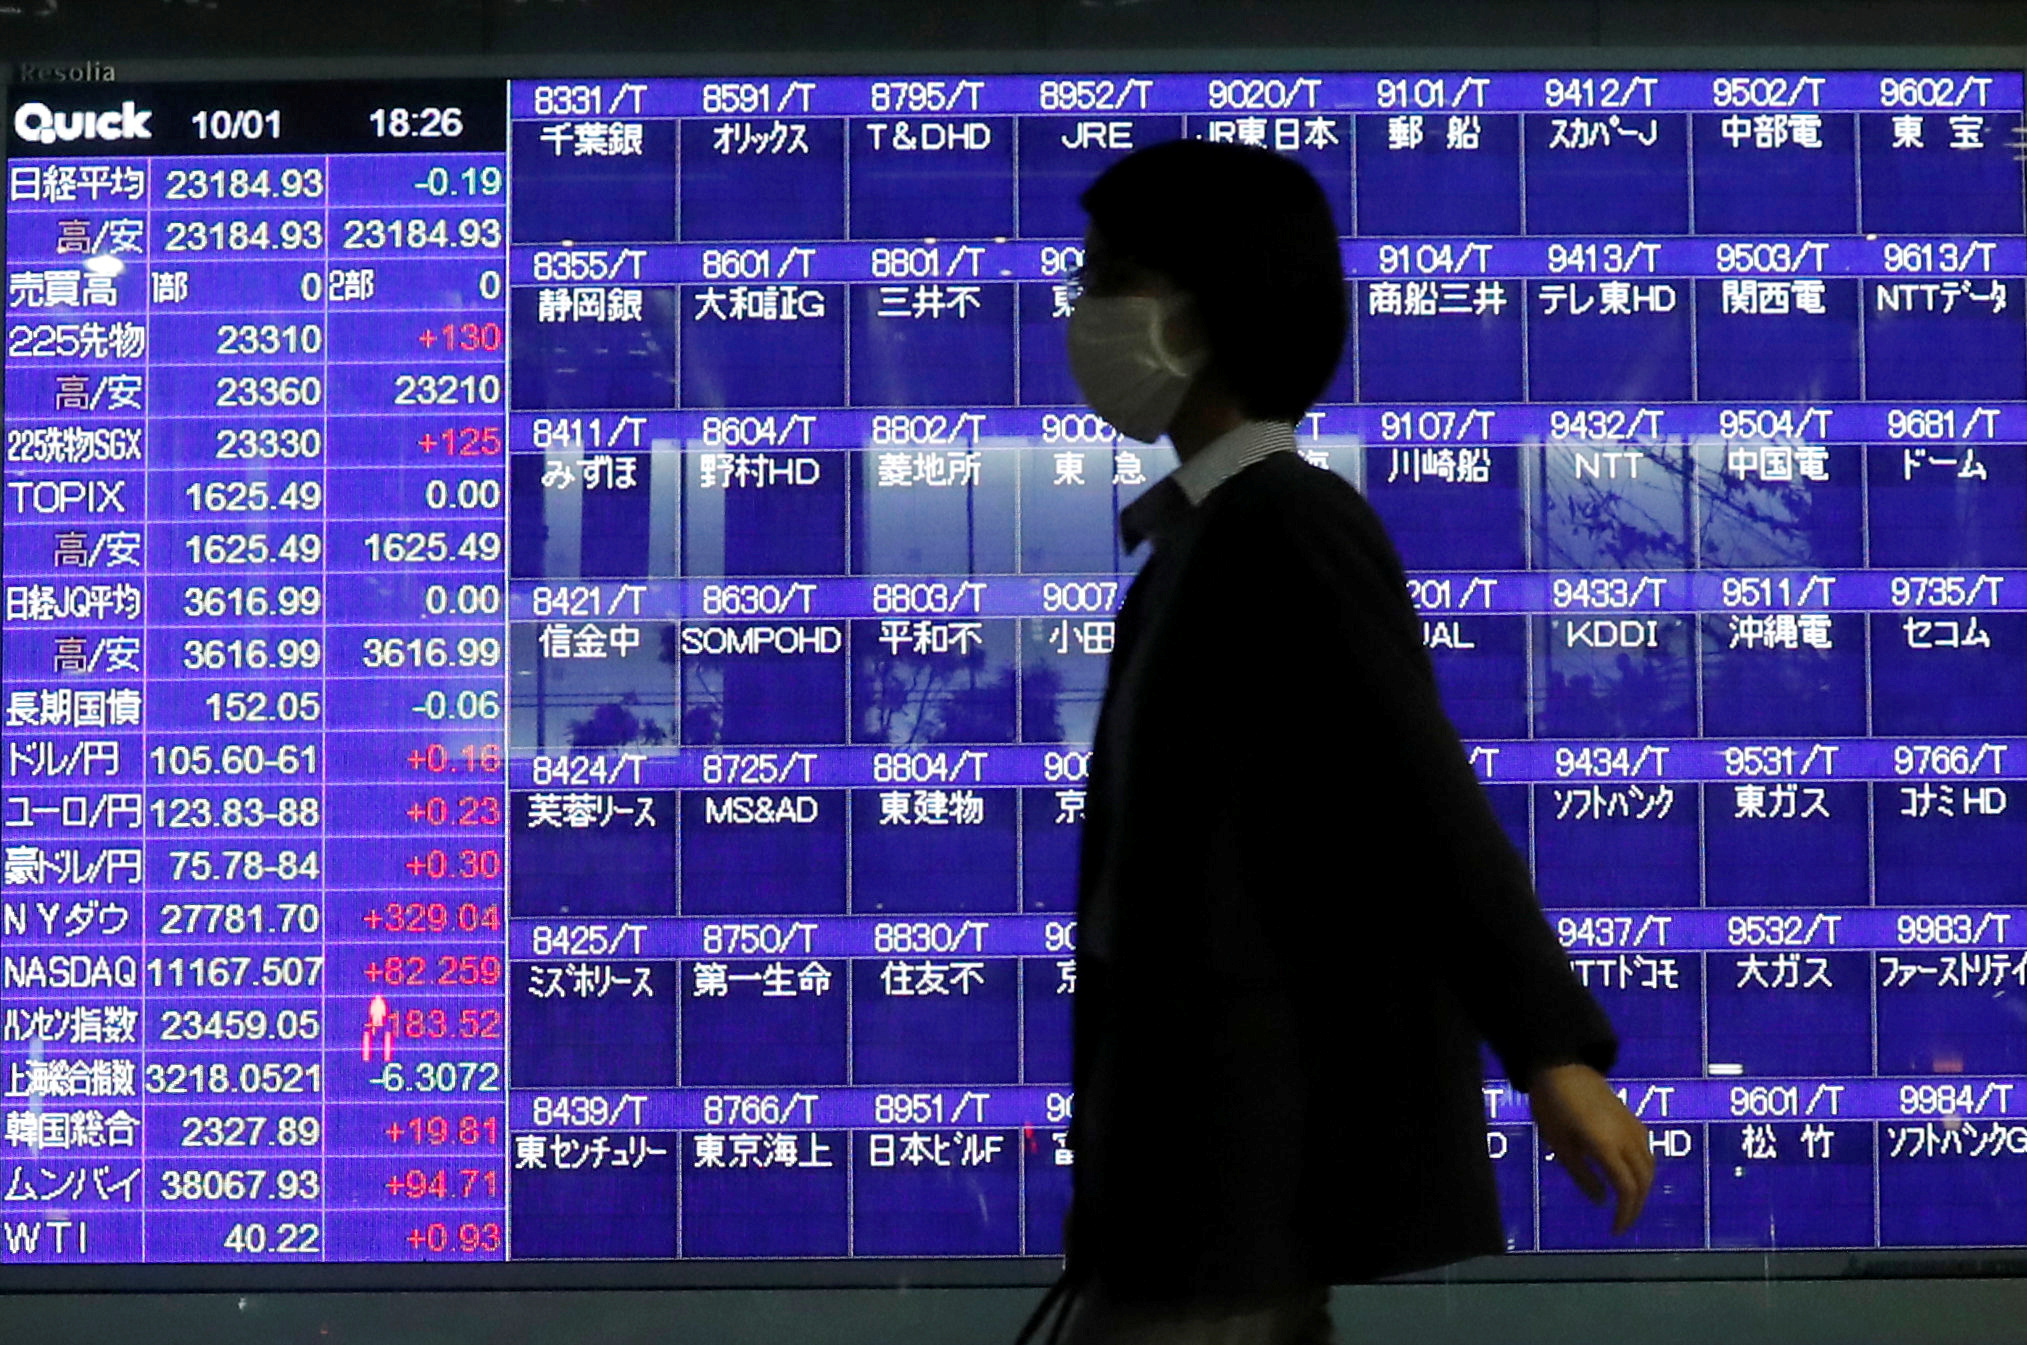 Tokyo Stock Exchange temporarily suspended all trading due to system problems